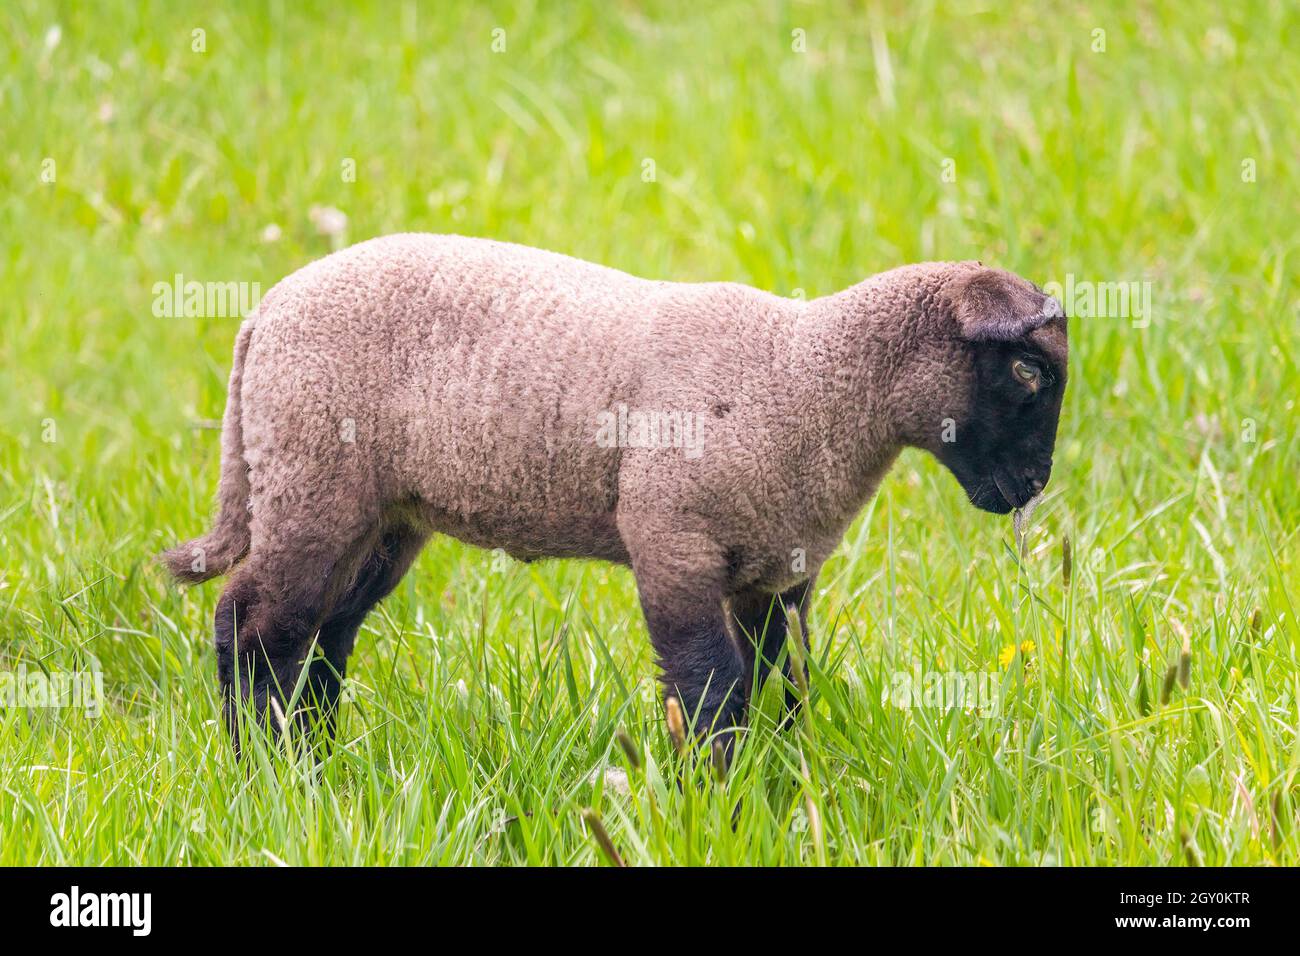 lamb in the grass - Suffolk sheep on pasture, side view Stock Photo